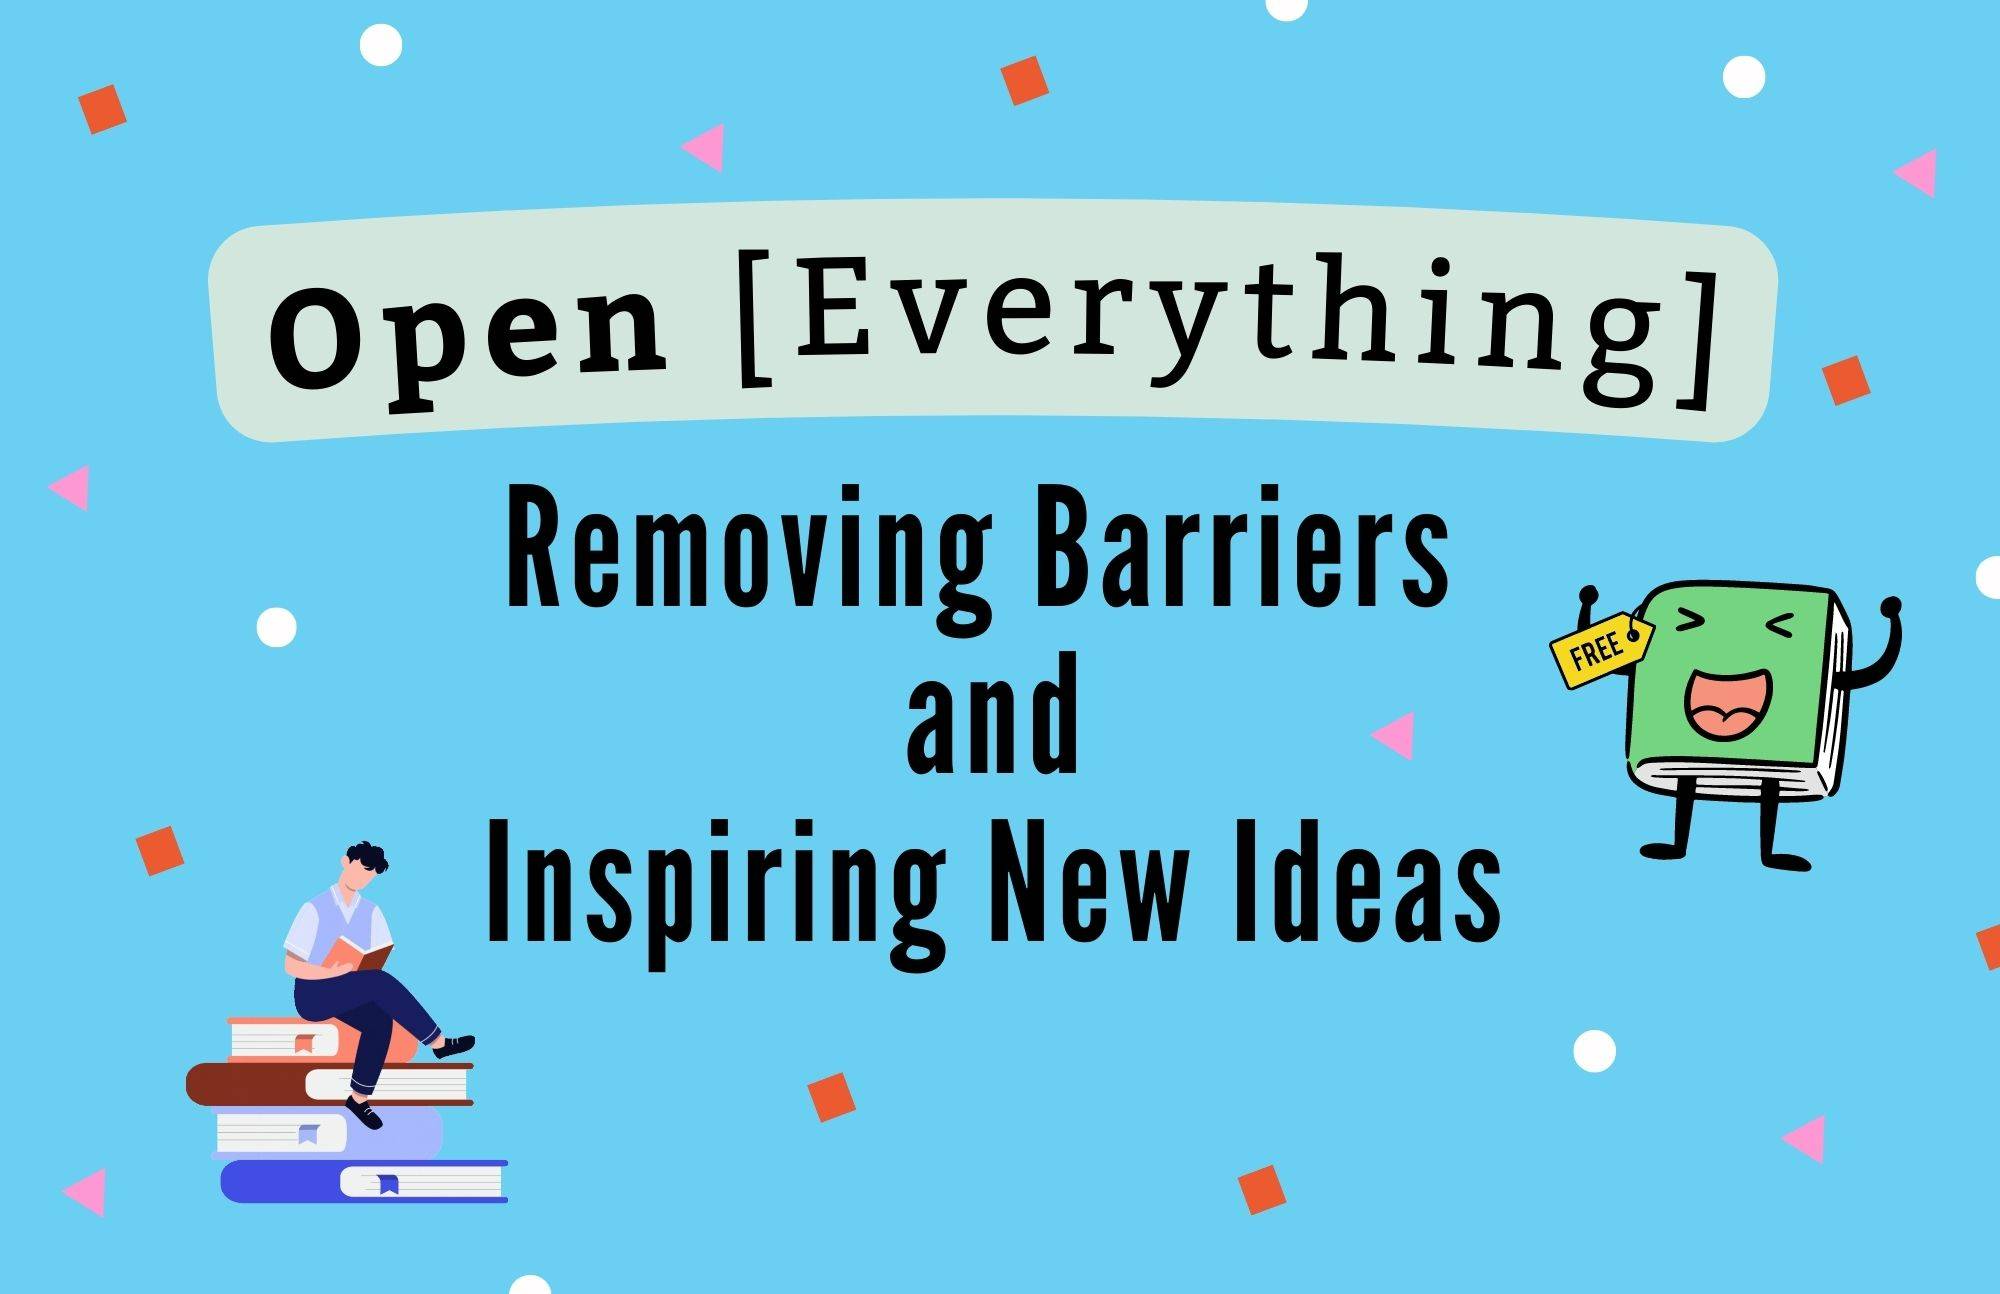 Open Everything - Removing Barriers and Inspiring New Ideas